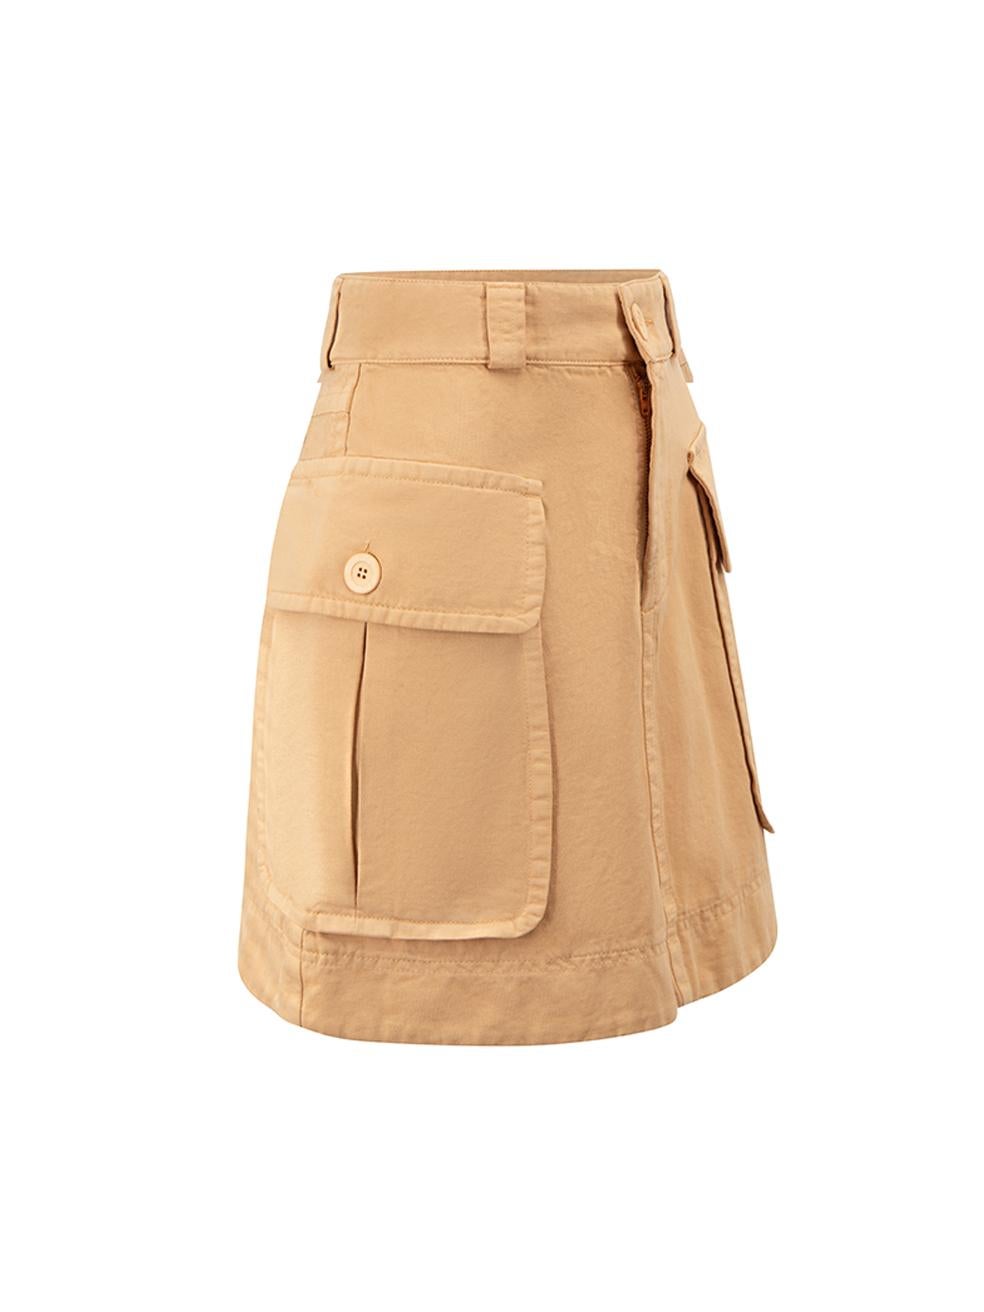 CONDITION is Never worn, with tags. No visible wear to skirt is evident on this new See by Chloé designer resale item.




Details


Beige

Cotton

Mini A-line skirt

Front zip closure with button

Belt hoops

Front side patch pockets with buttoned